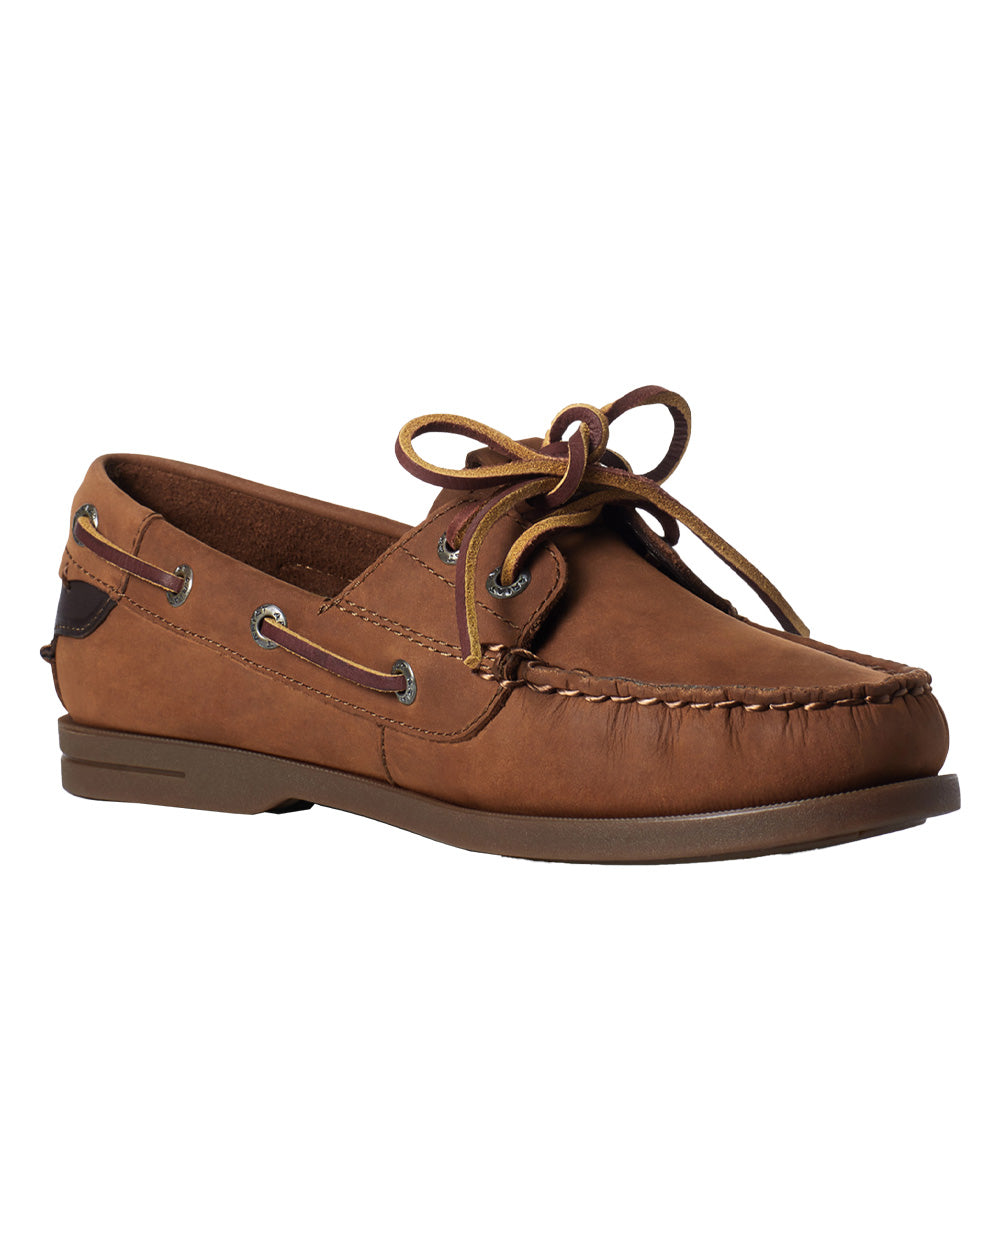 Walnut coloured Ariat Womens Antigua Boat Shoes on White background 